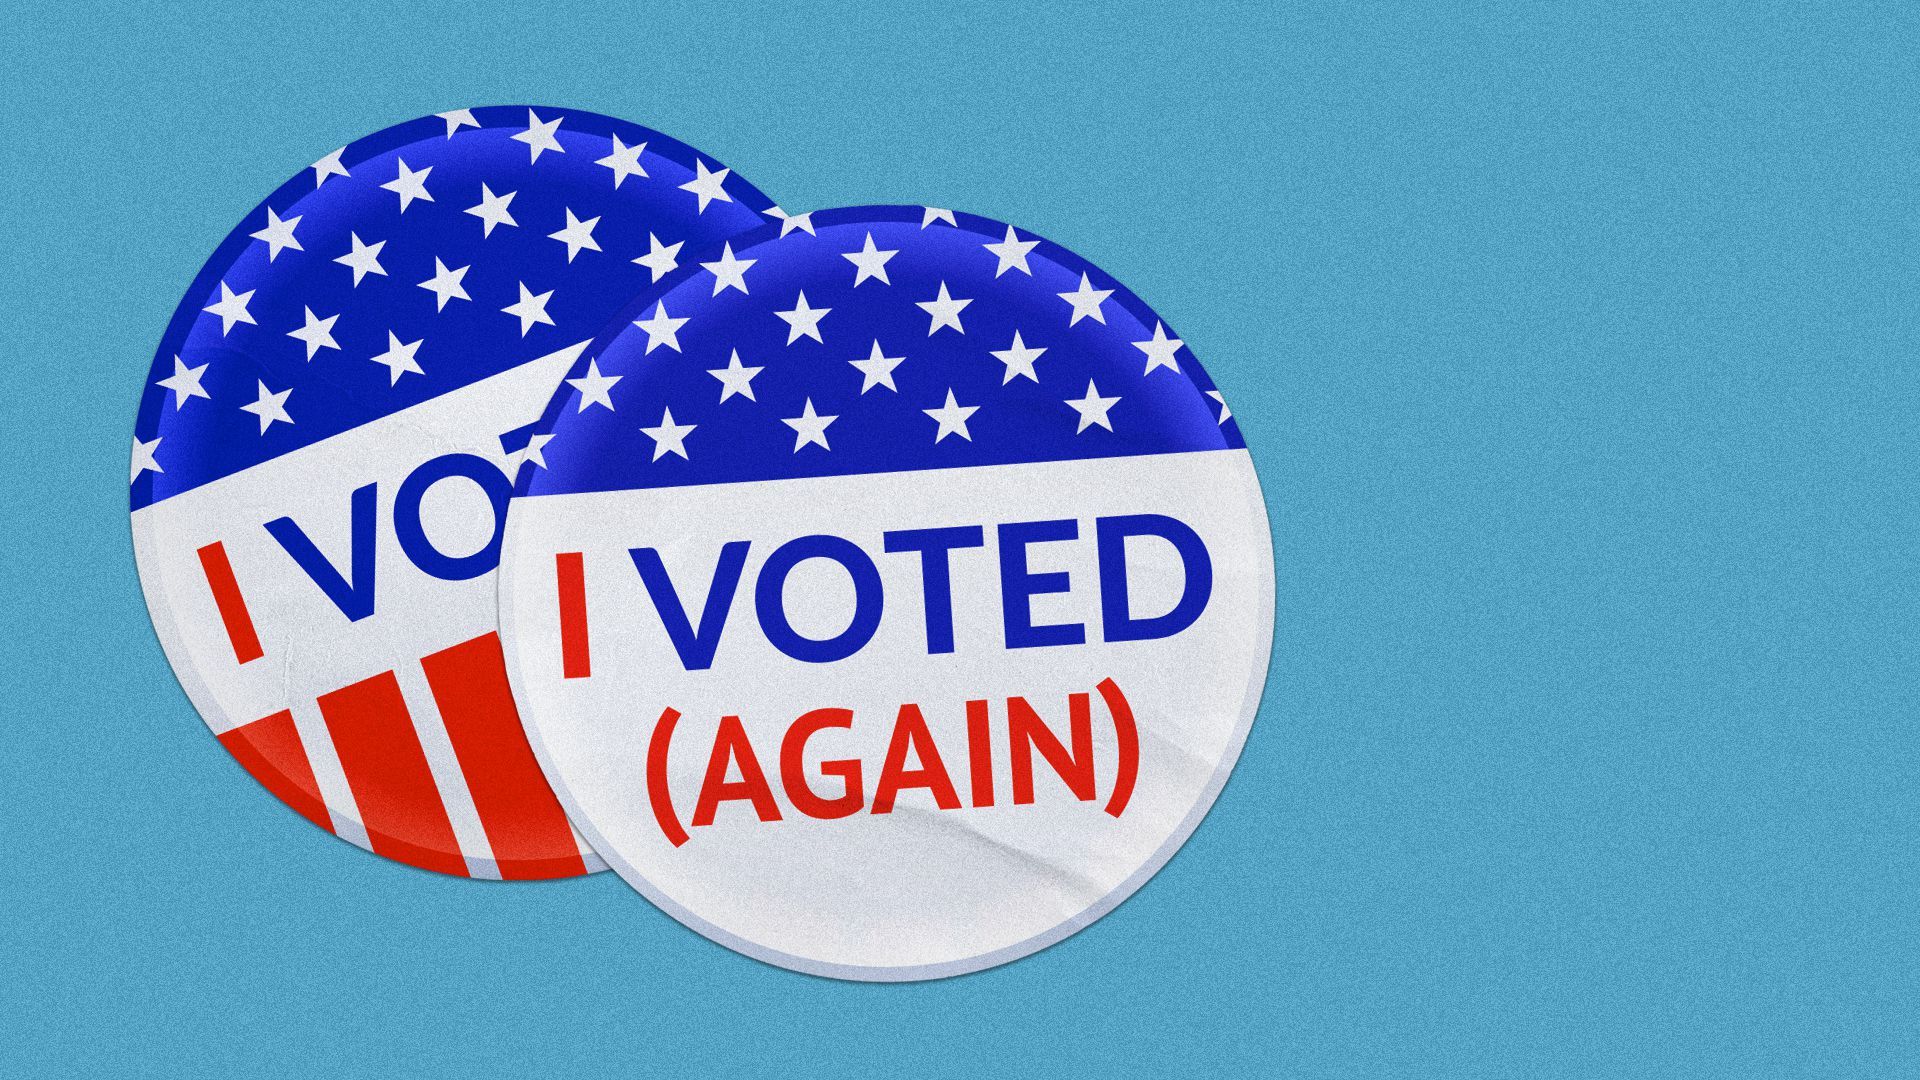 Illustration of an "I voted (again)" sticker overlapping an "I voted" sticker.